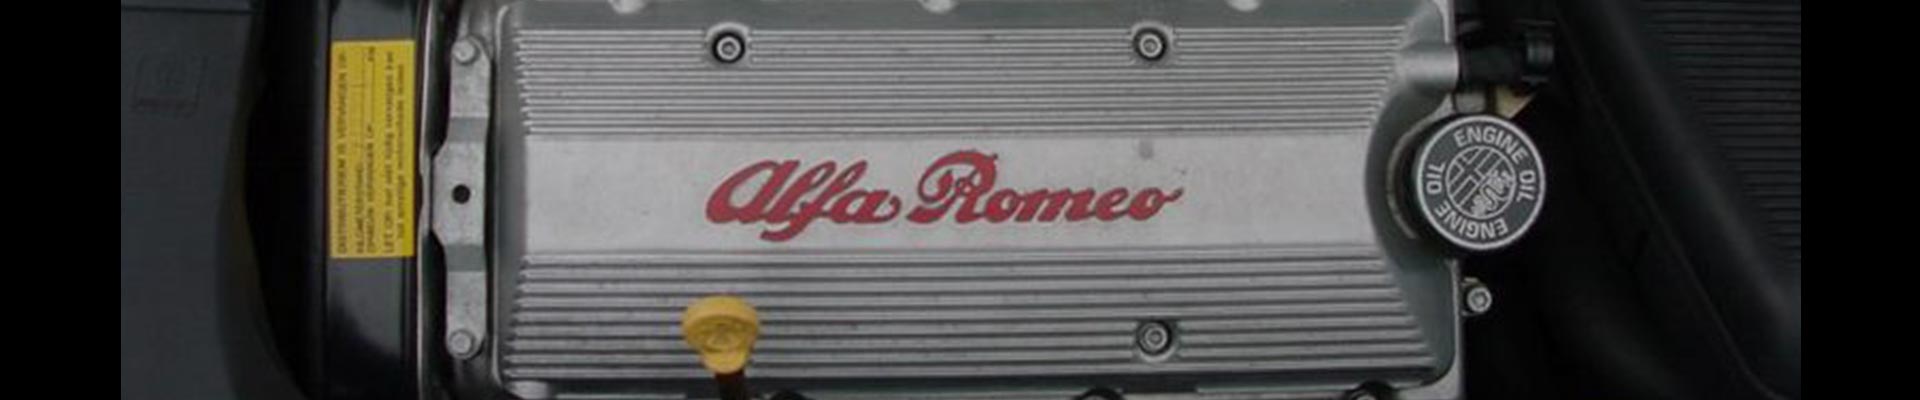 Shop Replacement 1988 Alfa Romeo Milano Parts with Discounted Price on the Net